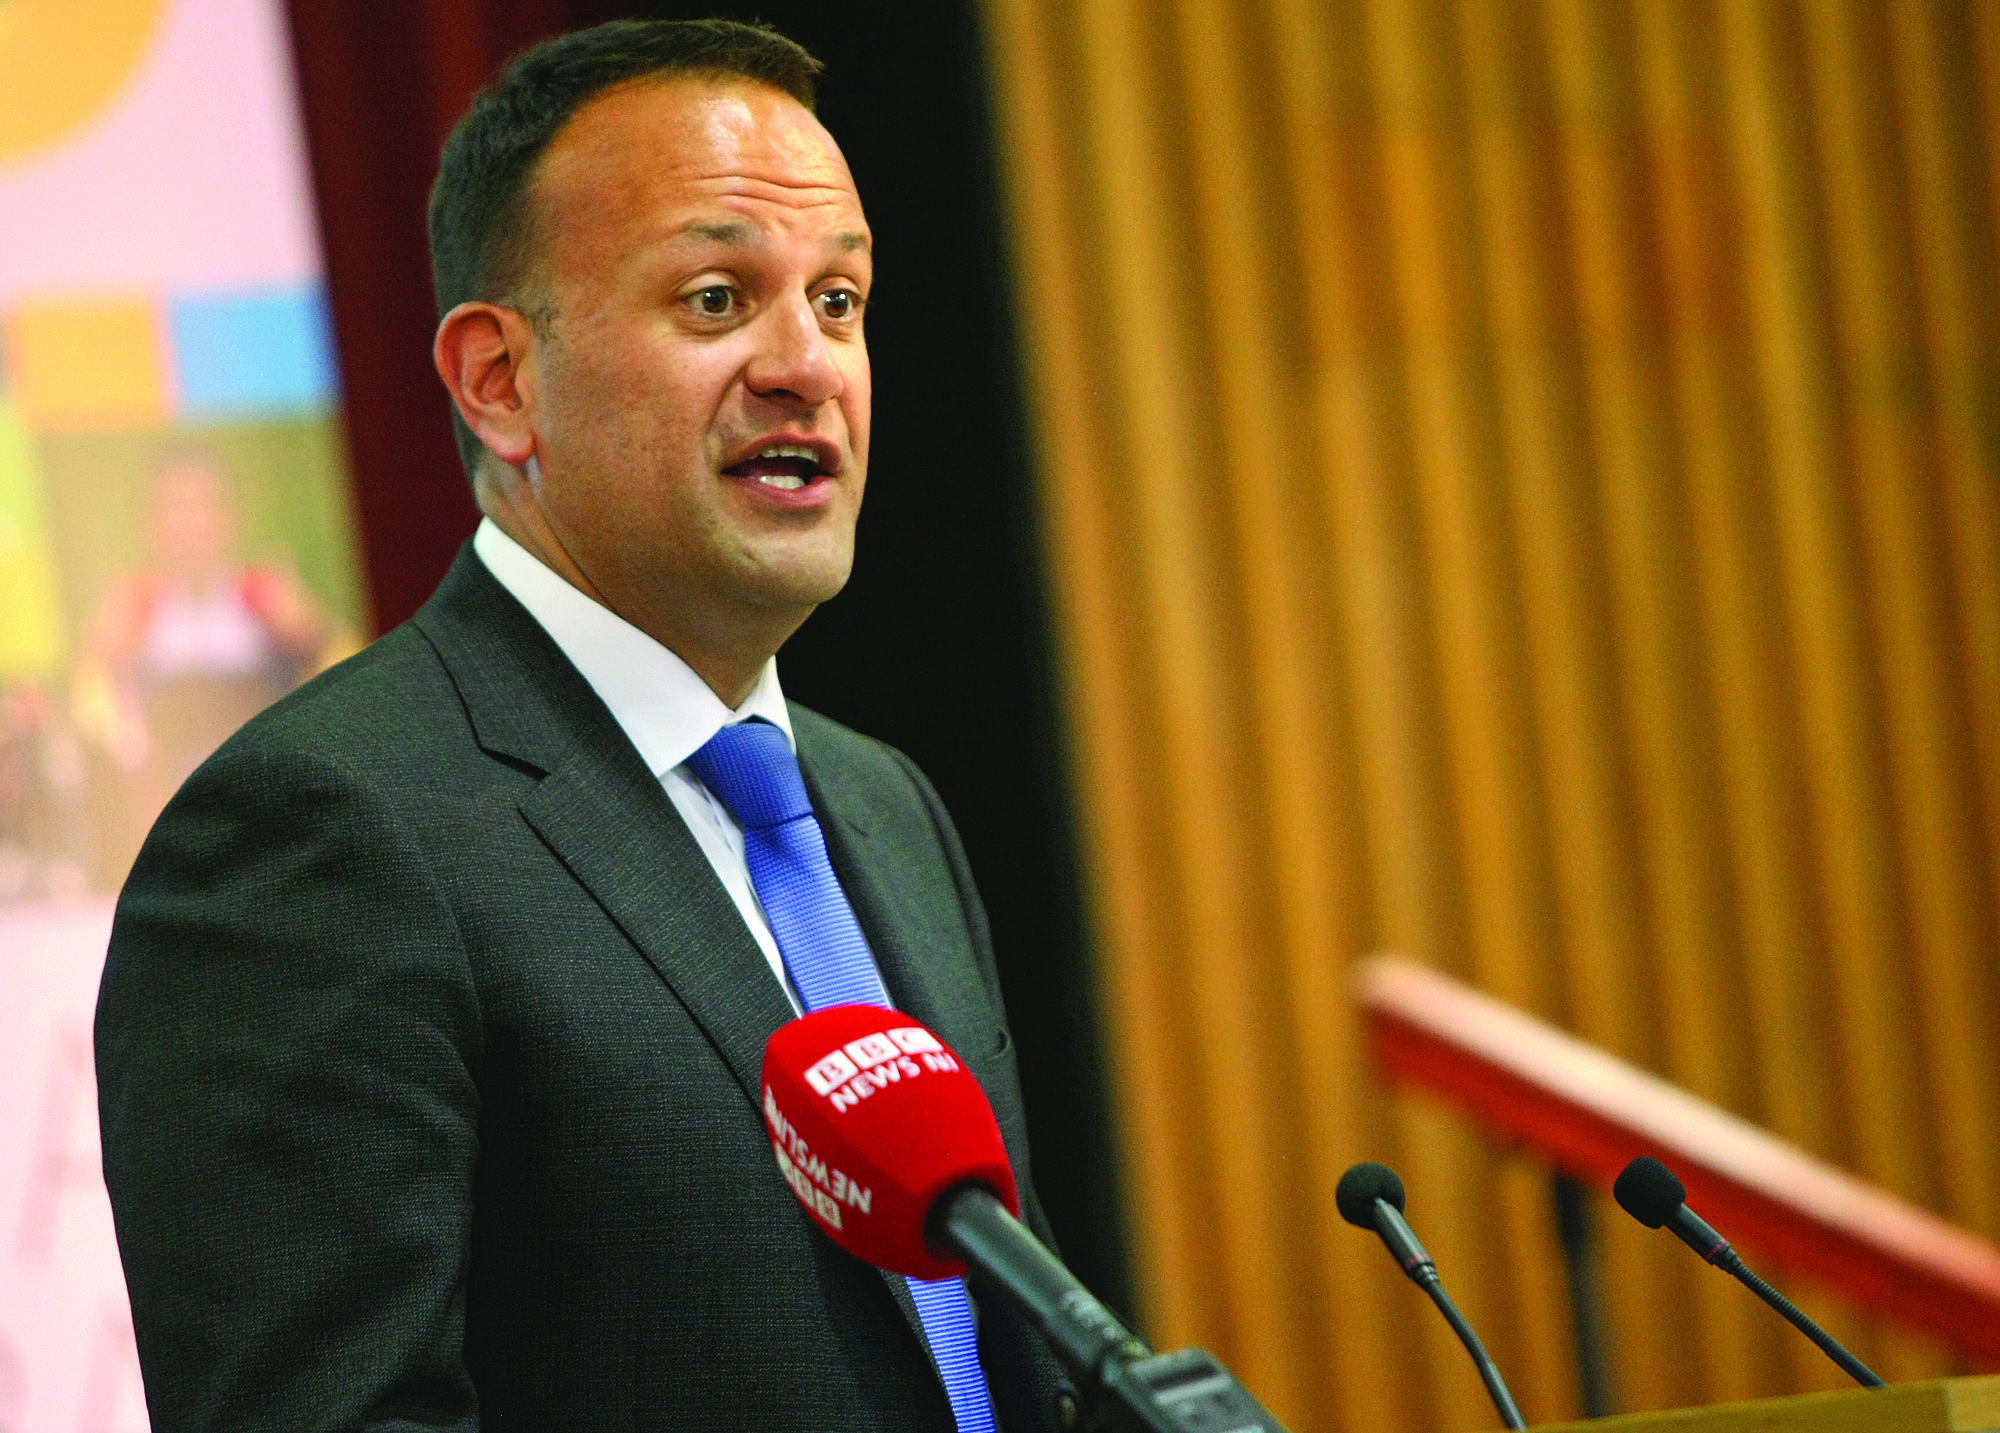 LETTER: Will a public appeal be enough to get Taoiseach Leo Varadkar to act?